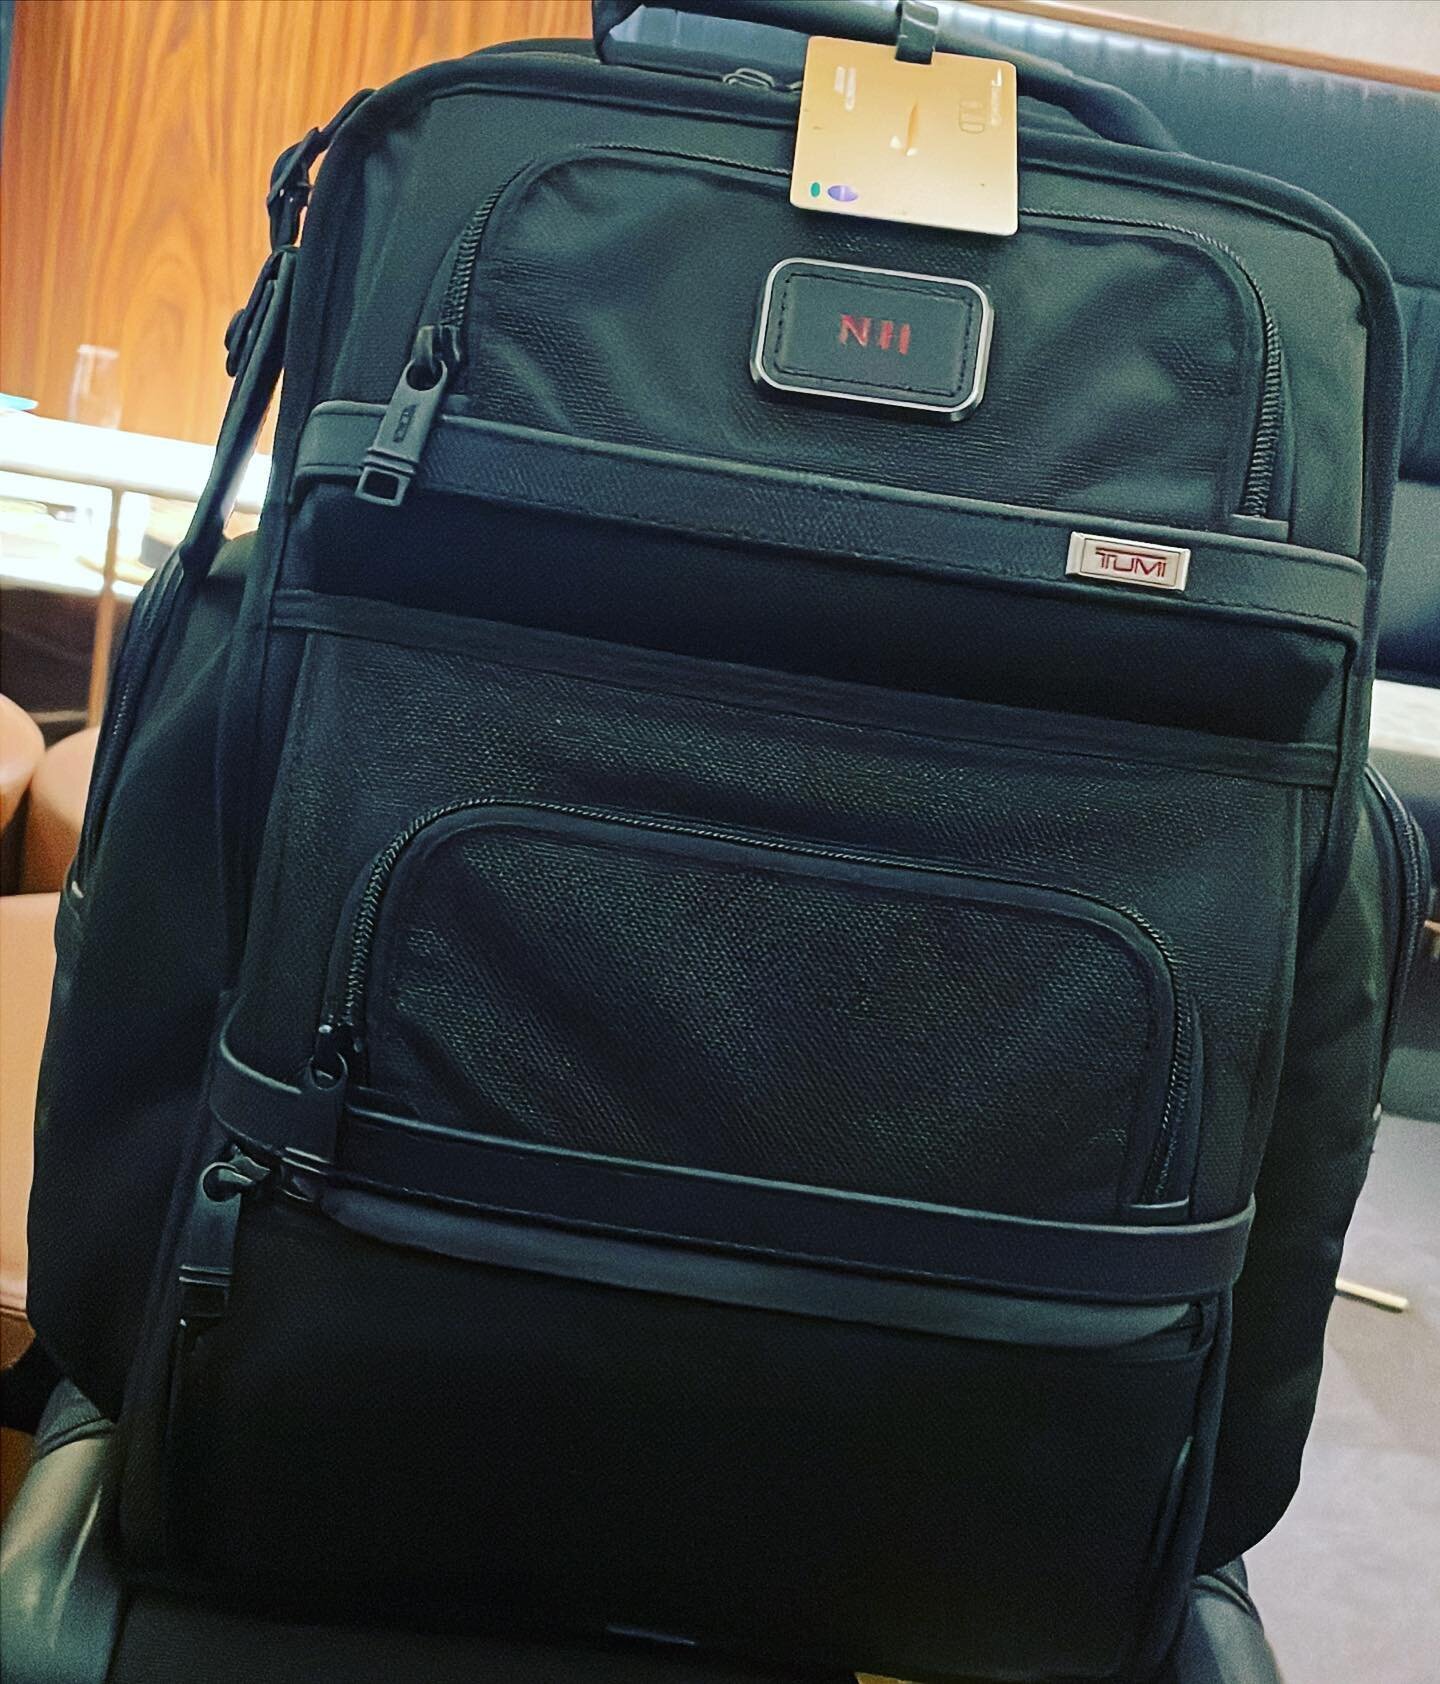 Little gift from me #tumi get it 😂😂 @tumitravel #travelwithstyle